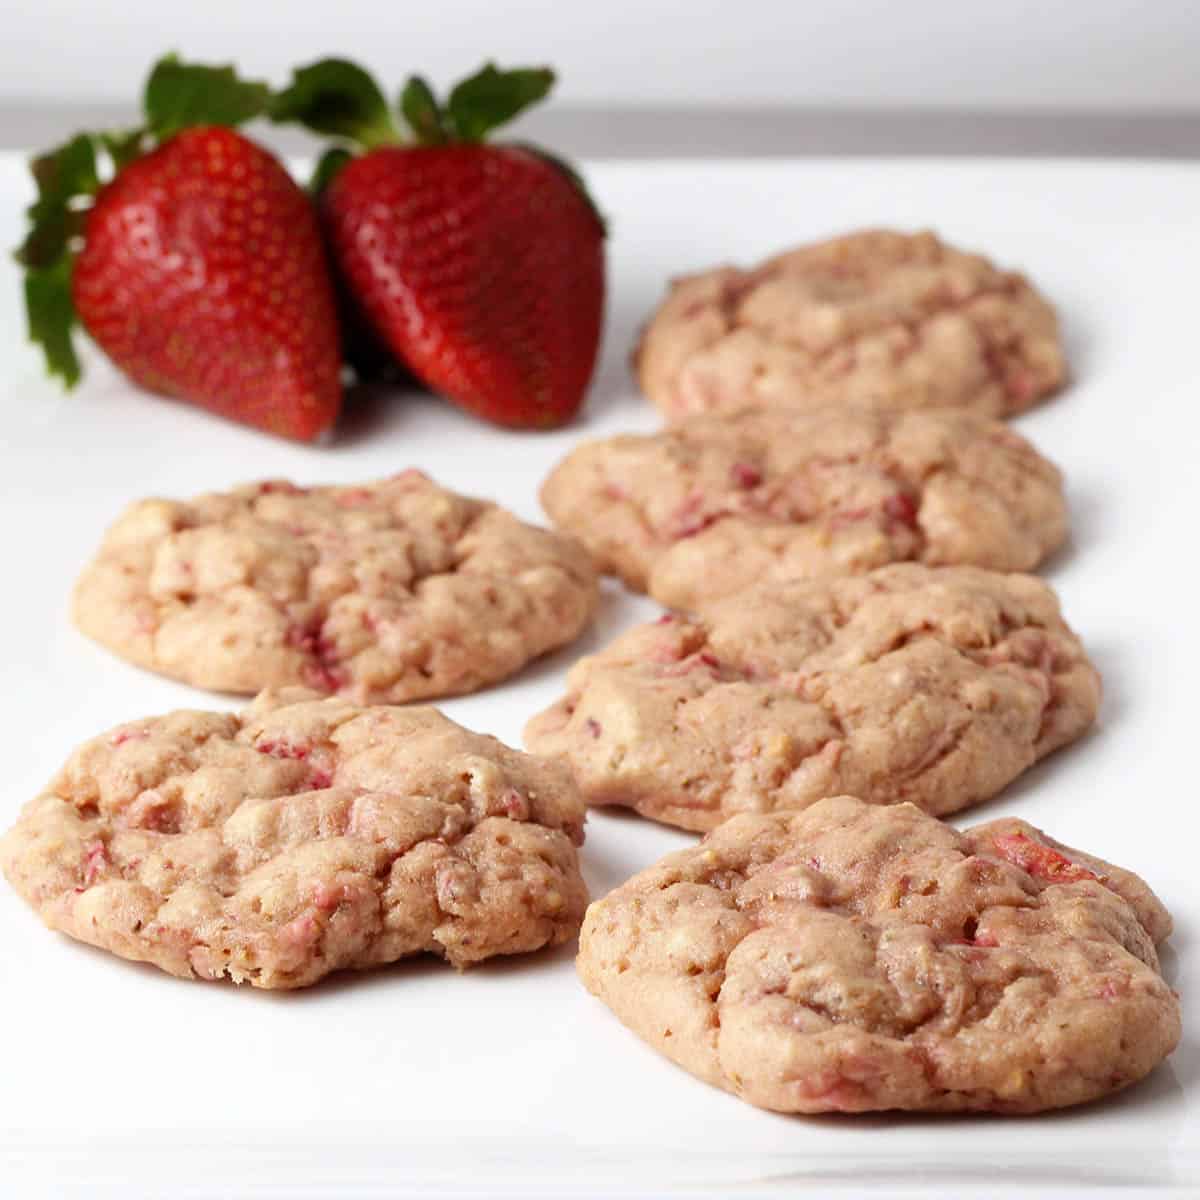 six cake-like strawberry protein cookies with visible strawberry pieces in them and two strawberries on a white plate